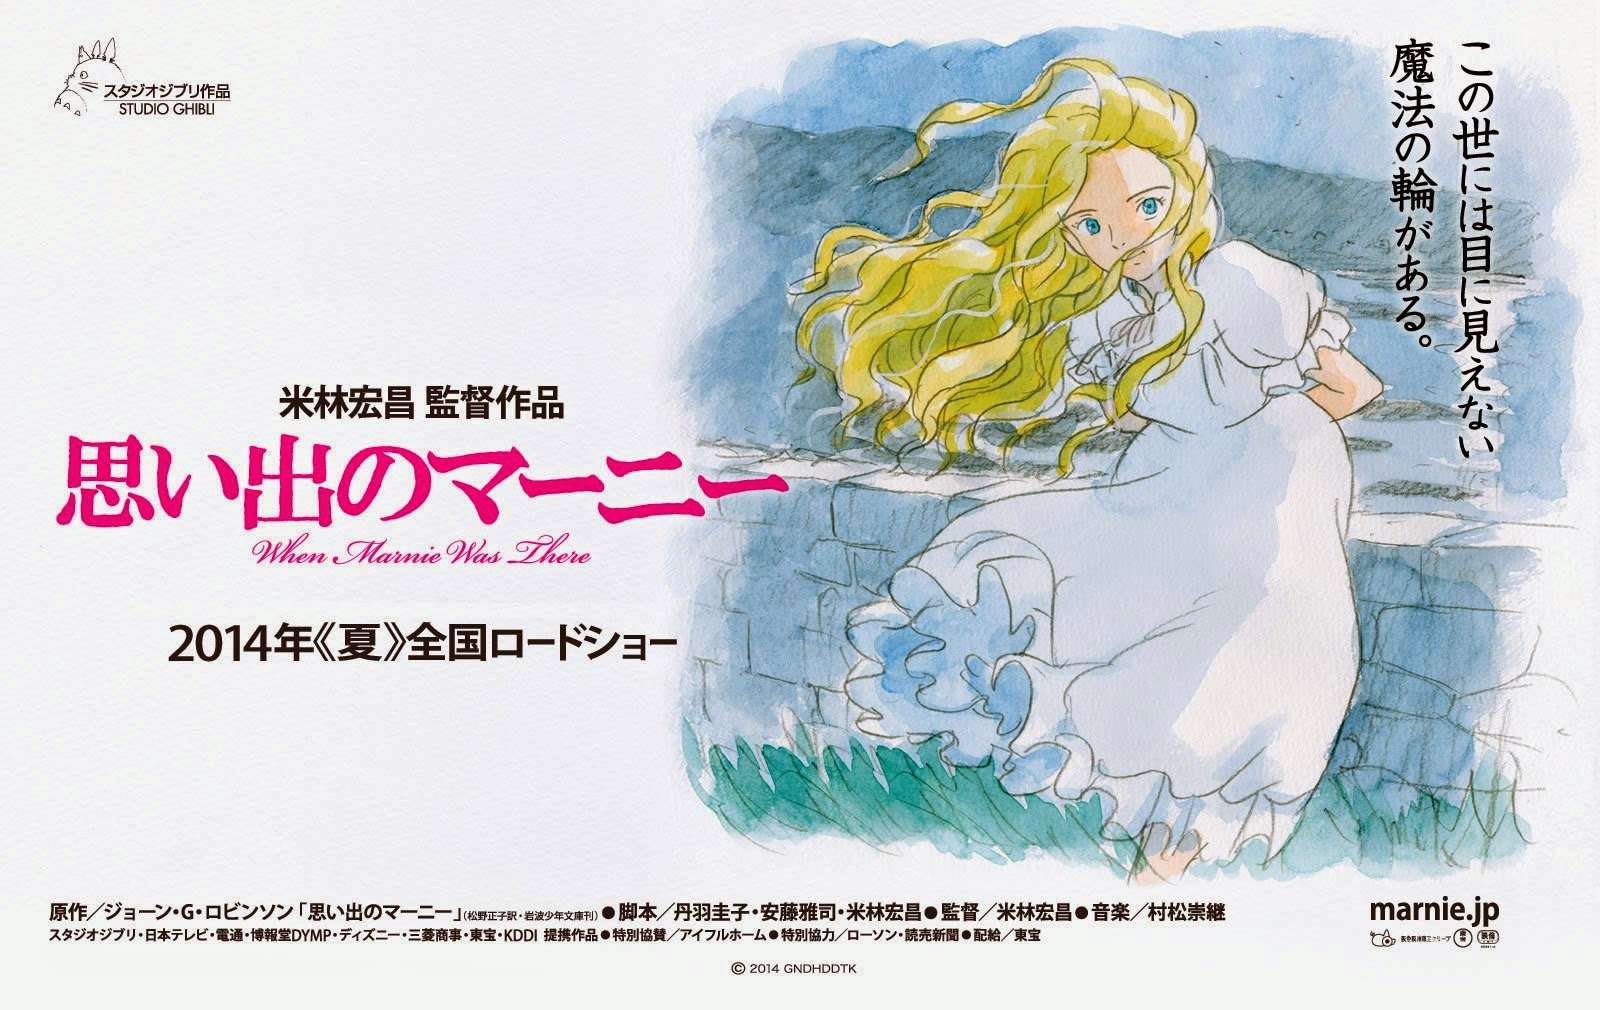 Trailer de “When Marnie Became once There”